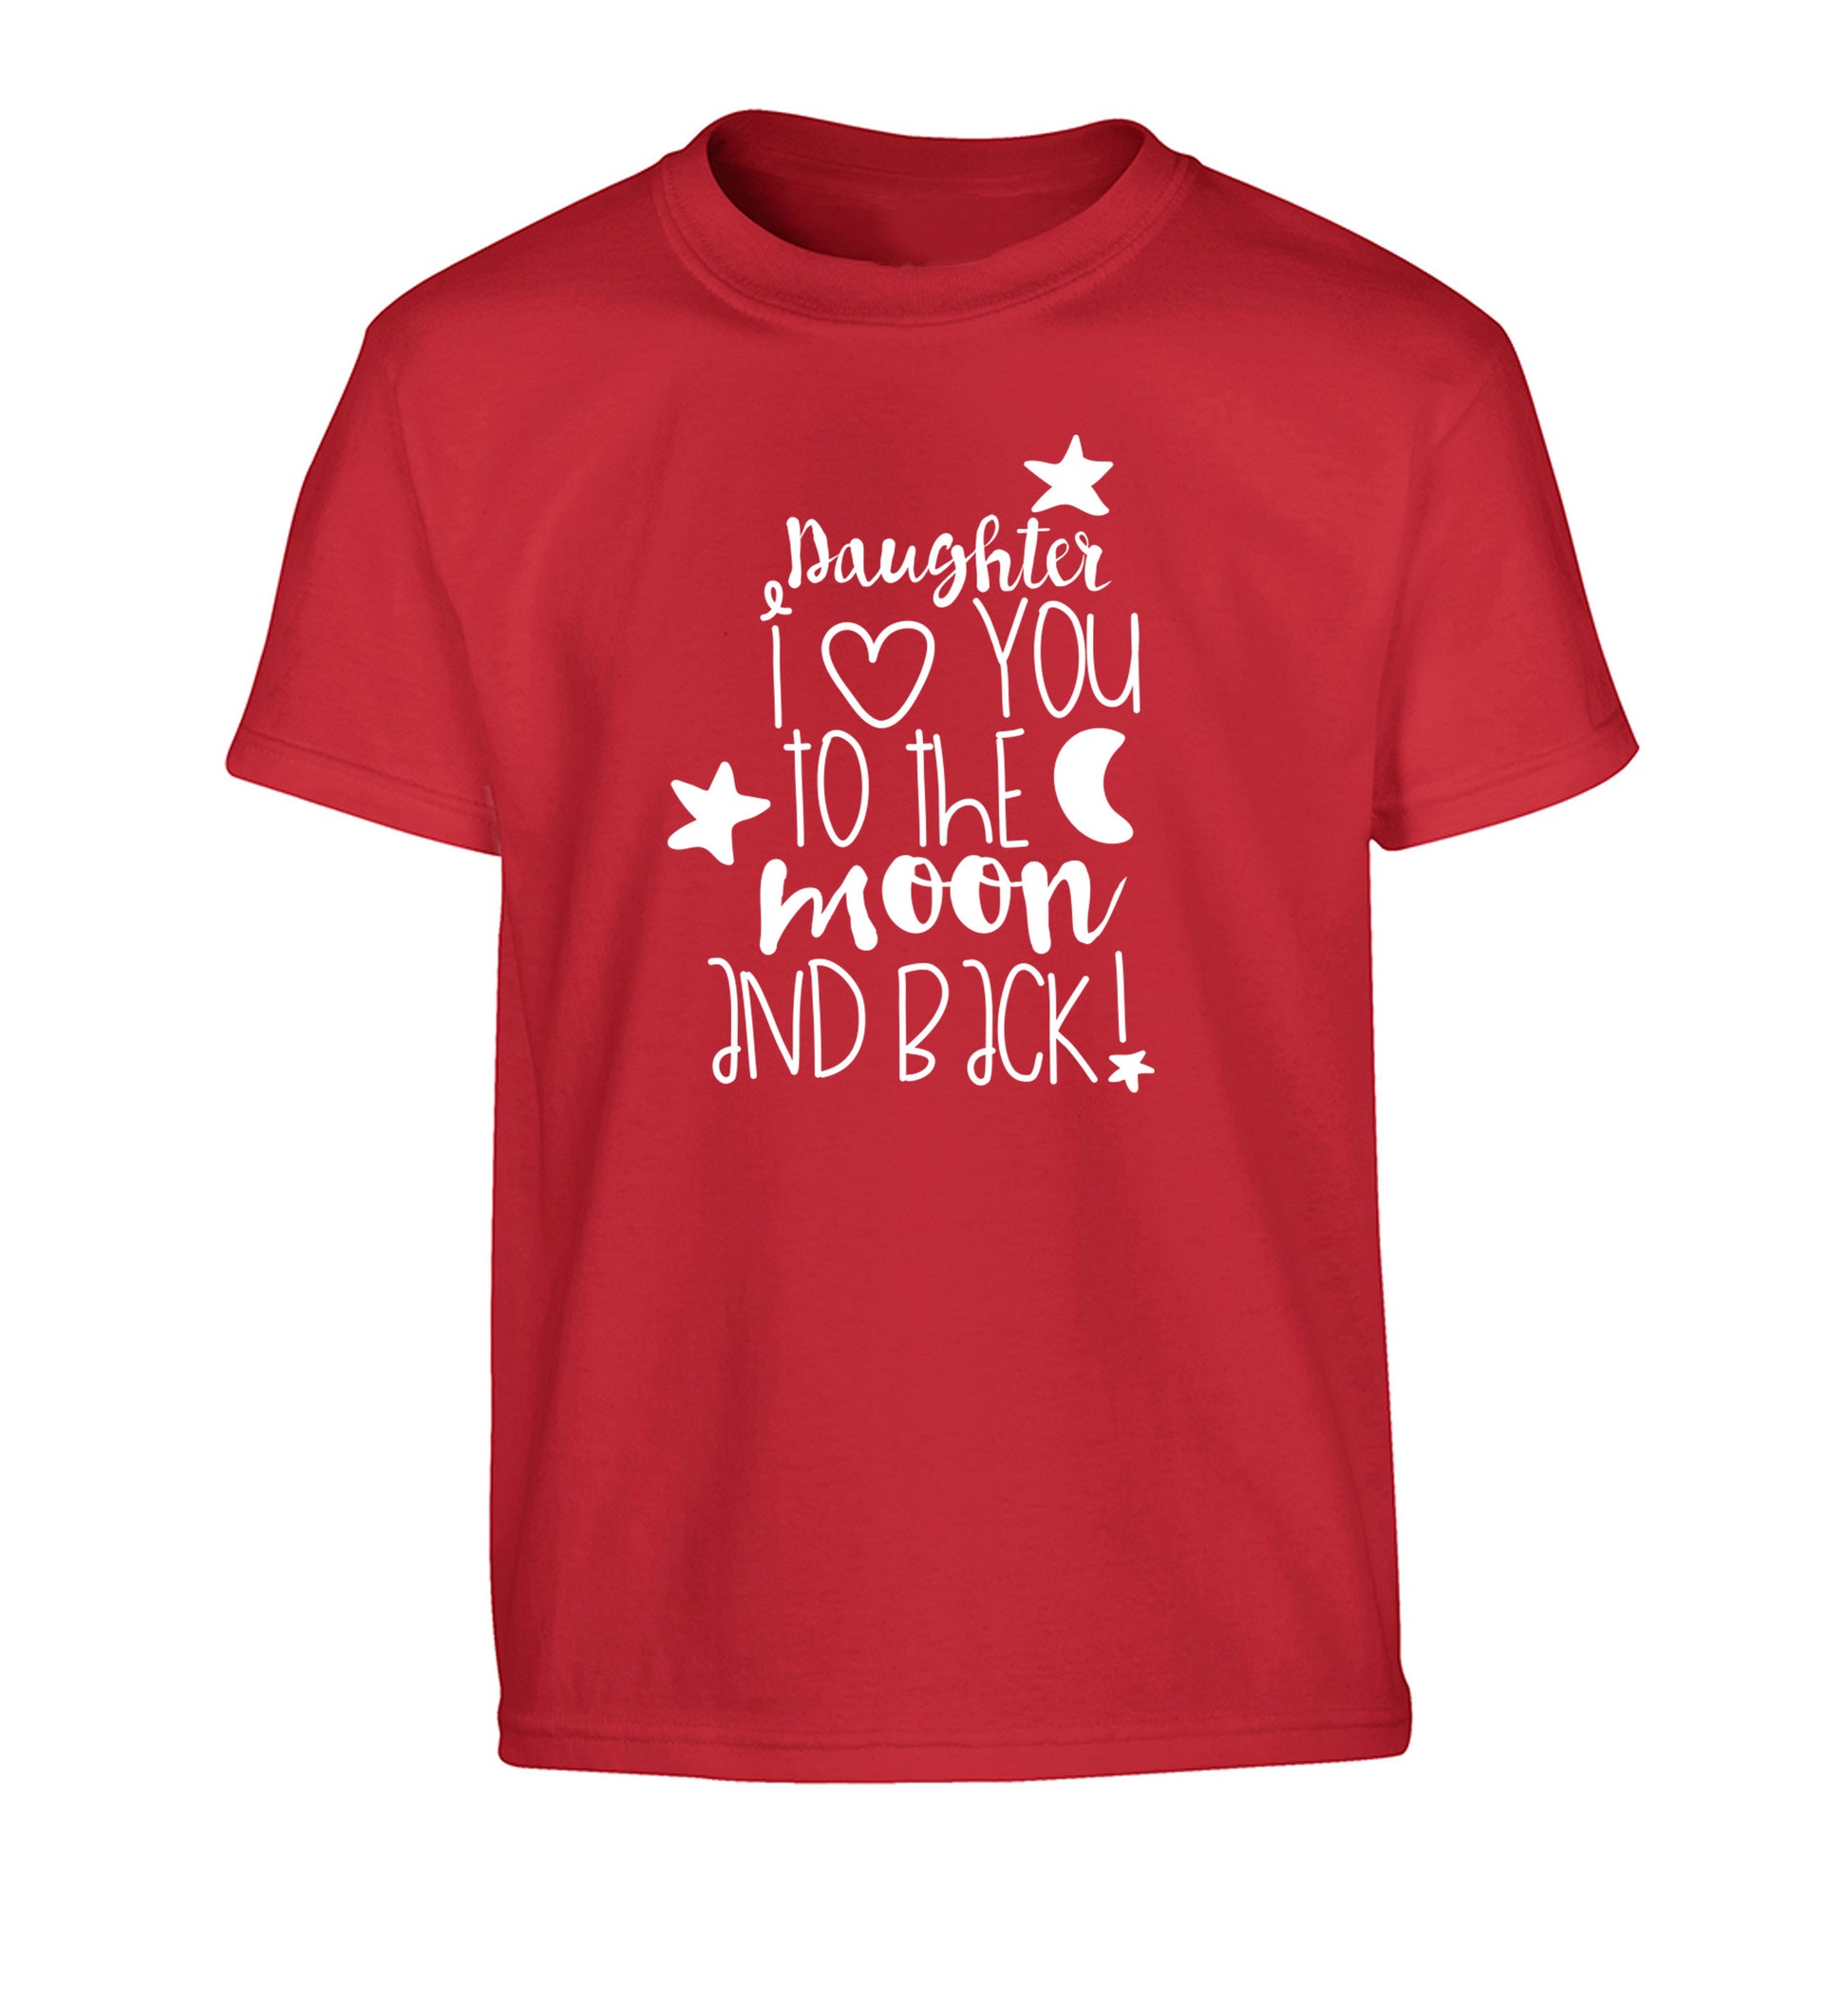 Daughter I love you to the moon and back Children's red Tshirt 12-14 Years